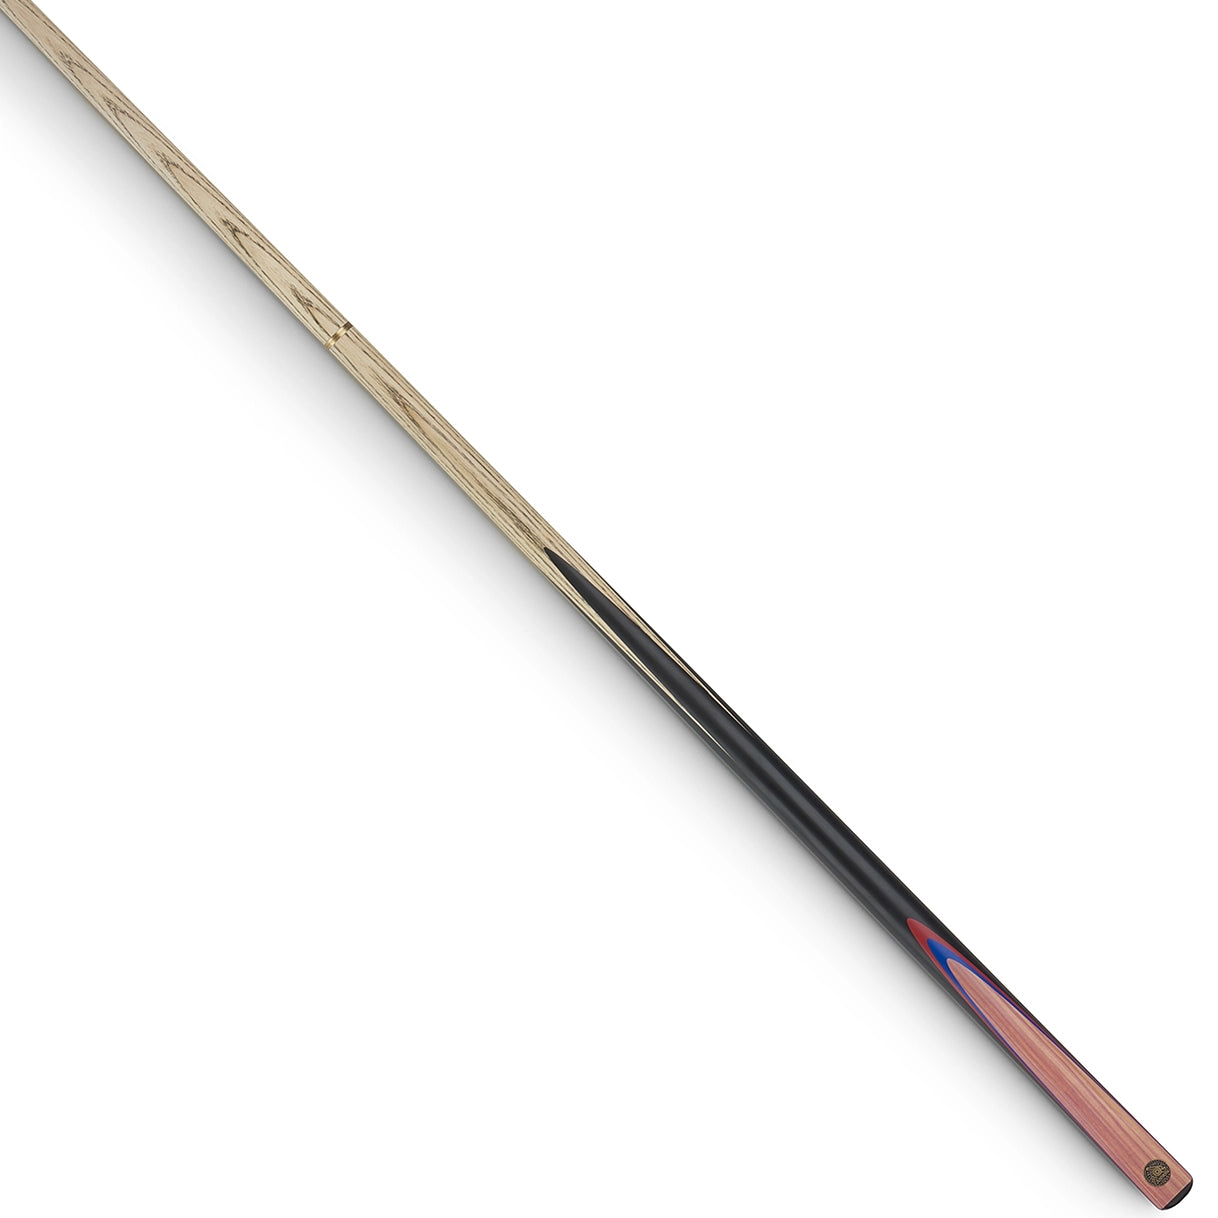 Cannon Metro Two Piece Snooker Cue. On angle view